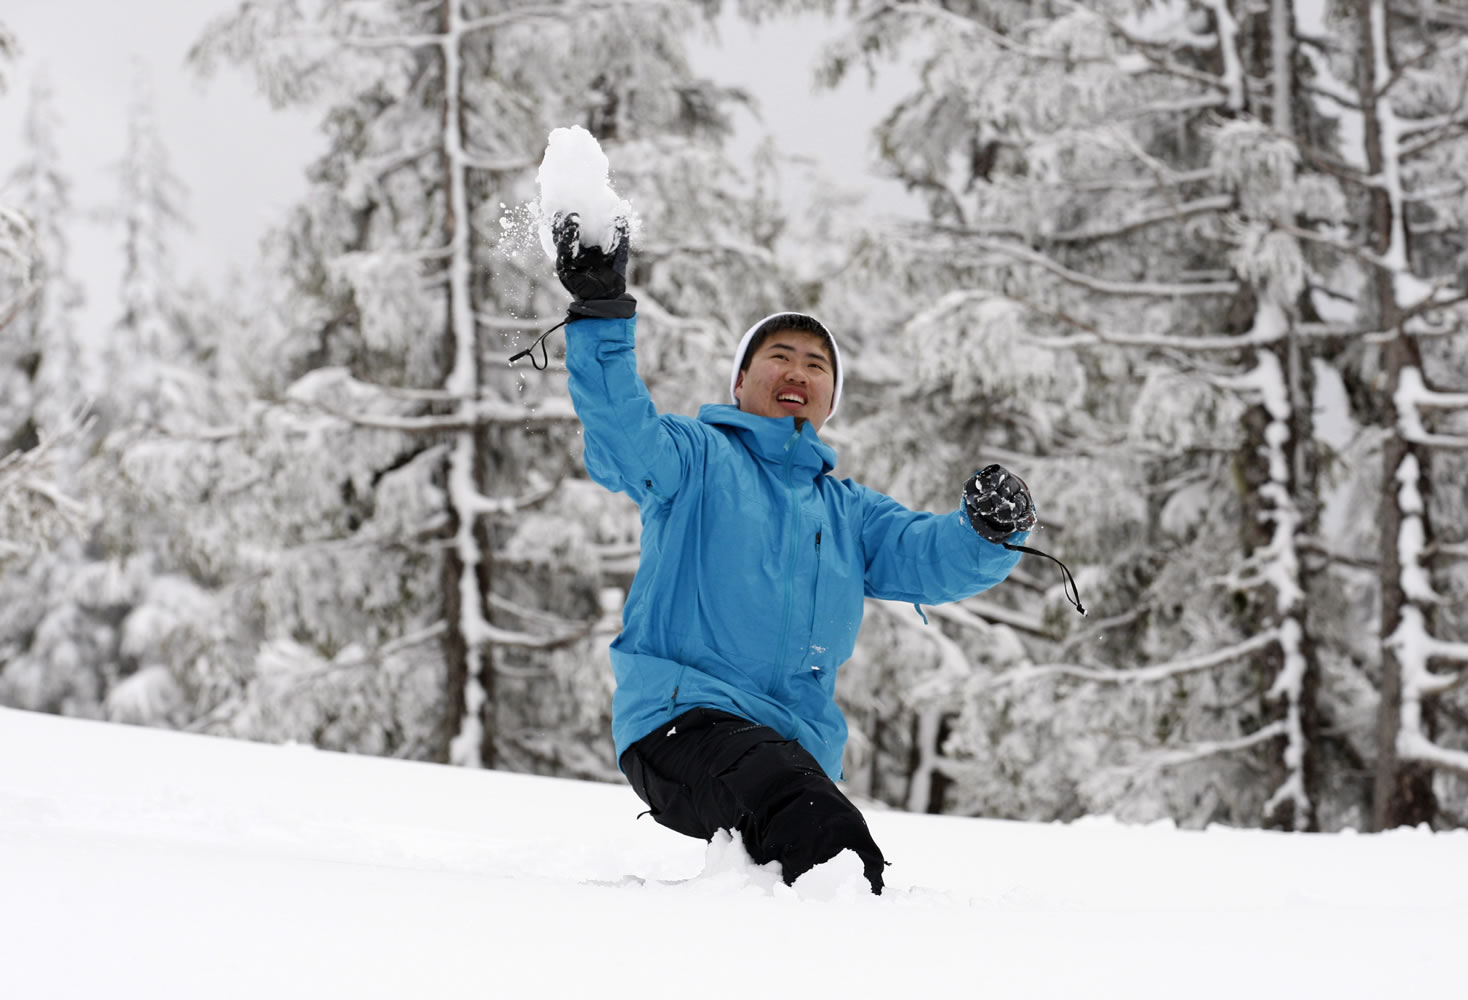 Kevin Nguyen of Vancouver throws a snowball at his father Saturday at Timberline, Ore.